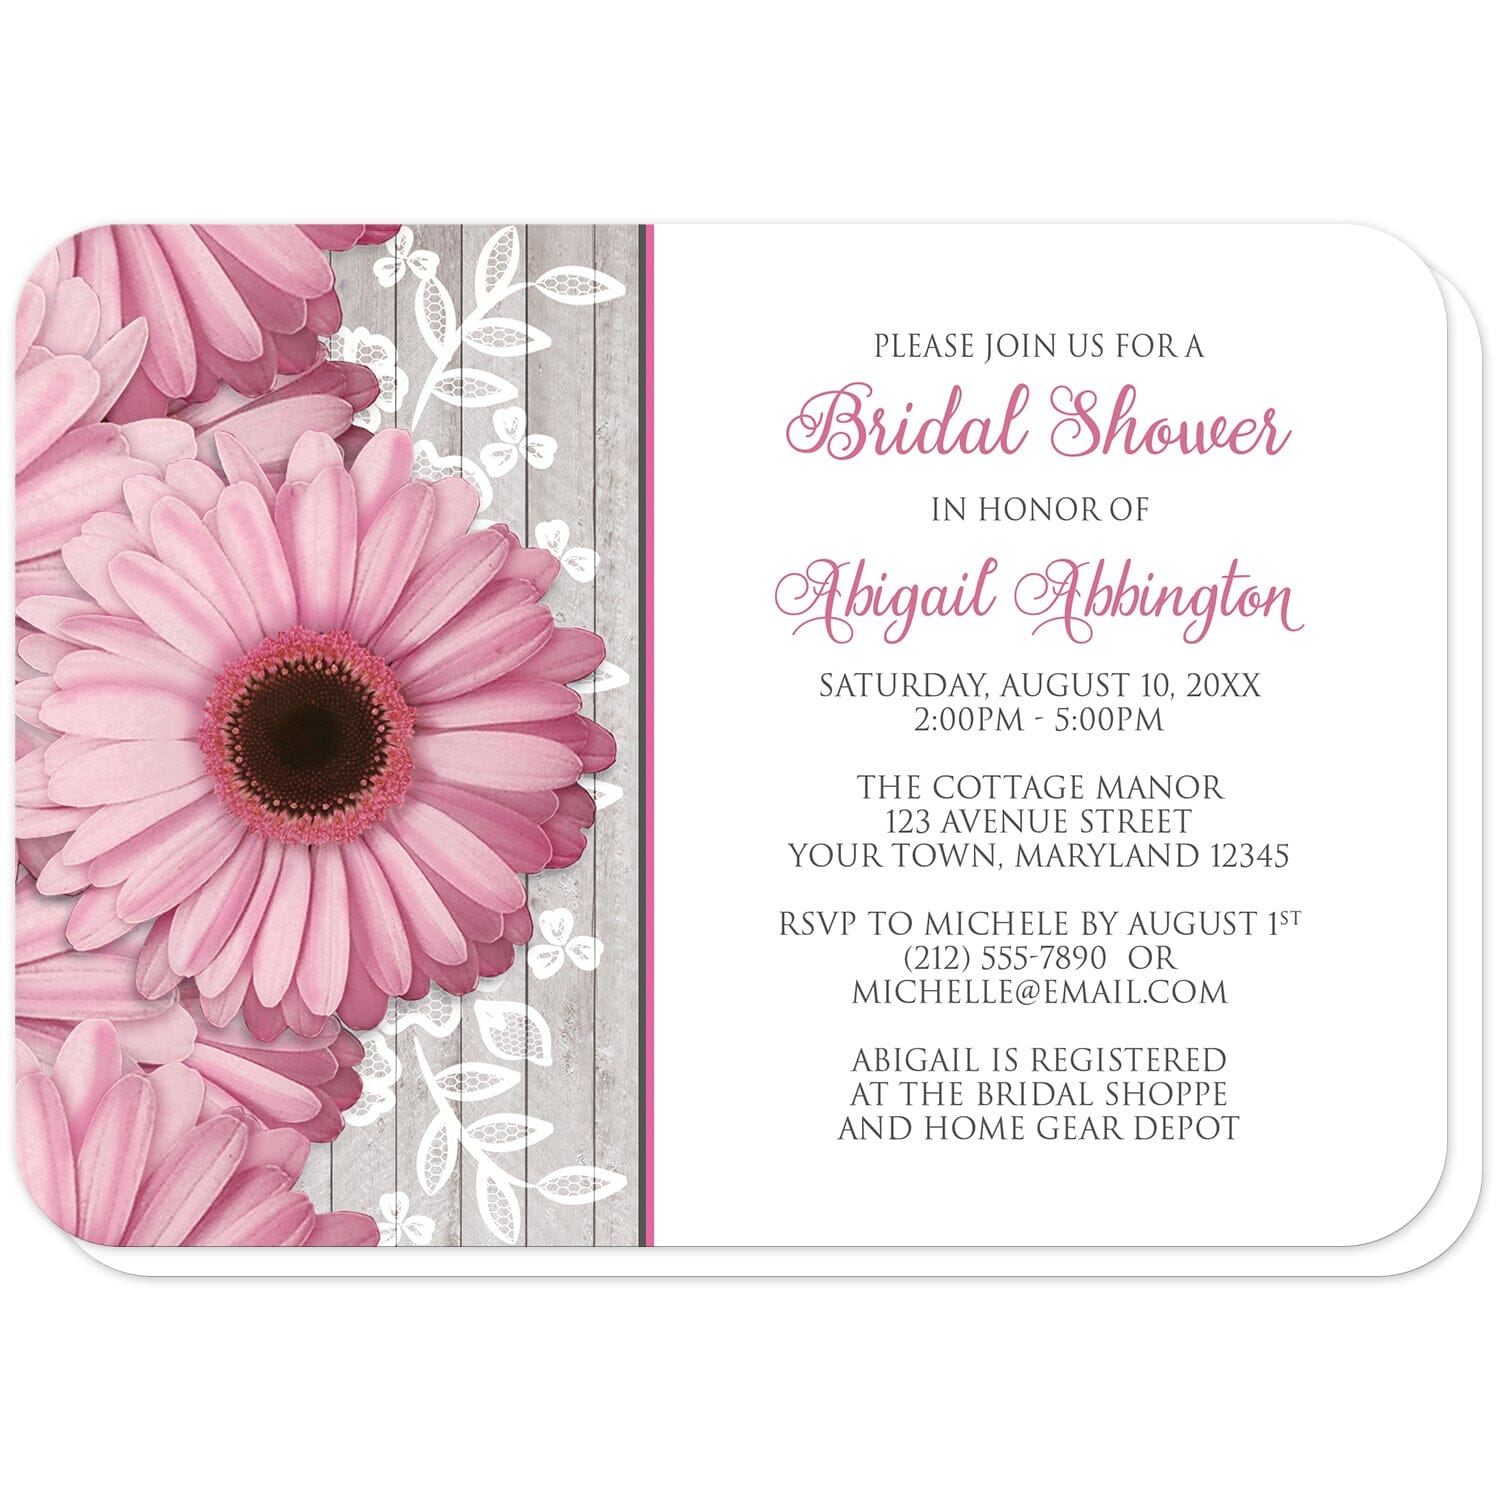 Rustic Pink Daisy Wood White Bridal Shower Invitations (with rounded corners) at Artistically Invited. Rustic pink daisy wood white bridal shower invitations designed with large and lovely pink daisy flowers with a white lace overlay over a light gray wood illustration along the left side. Your personalized bridal shower celebration details are custom printed in pink and gray over a white background to the right of the pretty pink daisies.